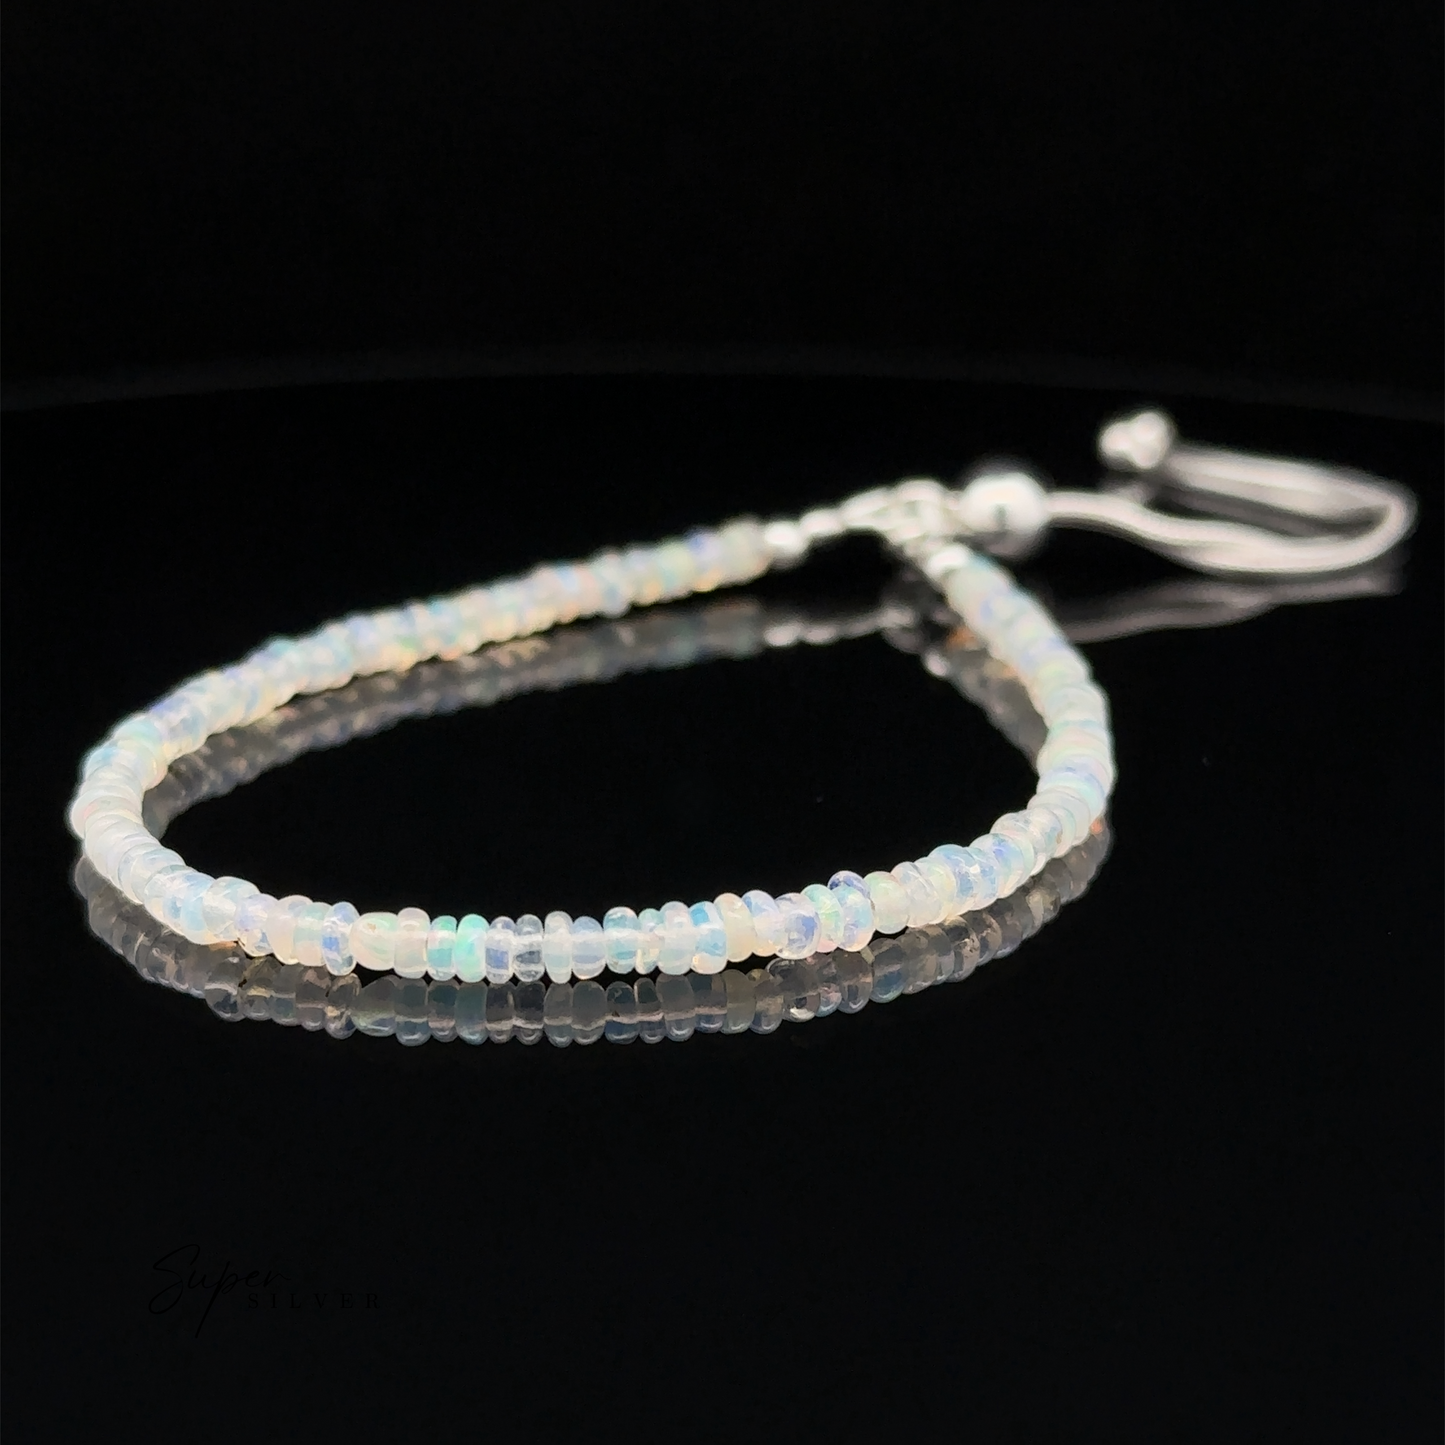 
                  
                    An Ethiopian Opal Beaded Bracelet with a sliding clasp, displayed on a black reflective surface. This beaded bracelet features an adjustable length closure for the perfect fit.
                  
                